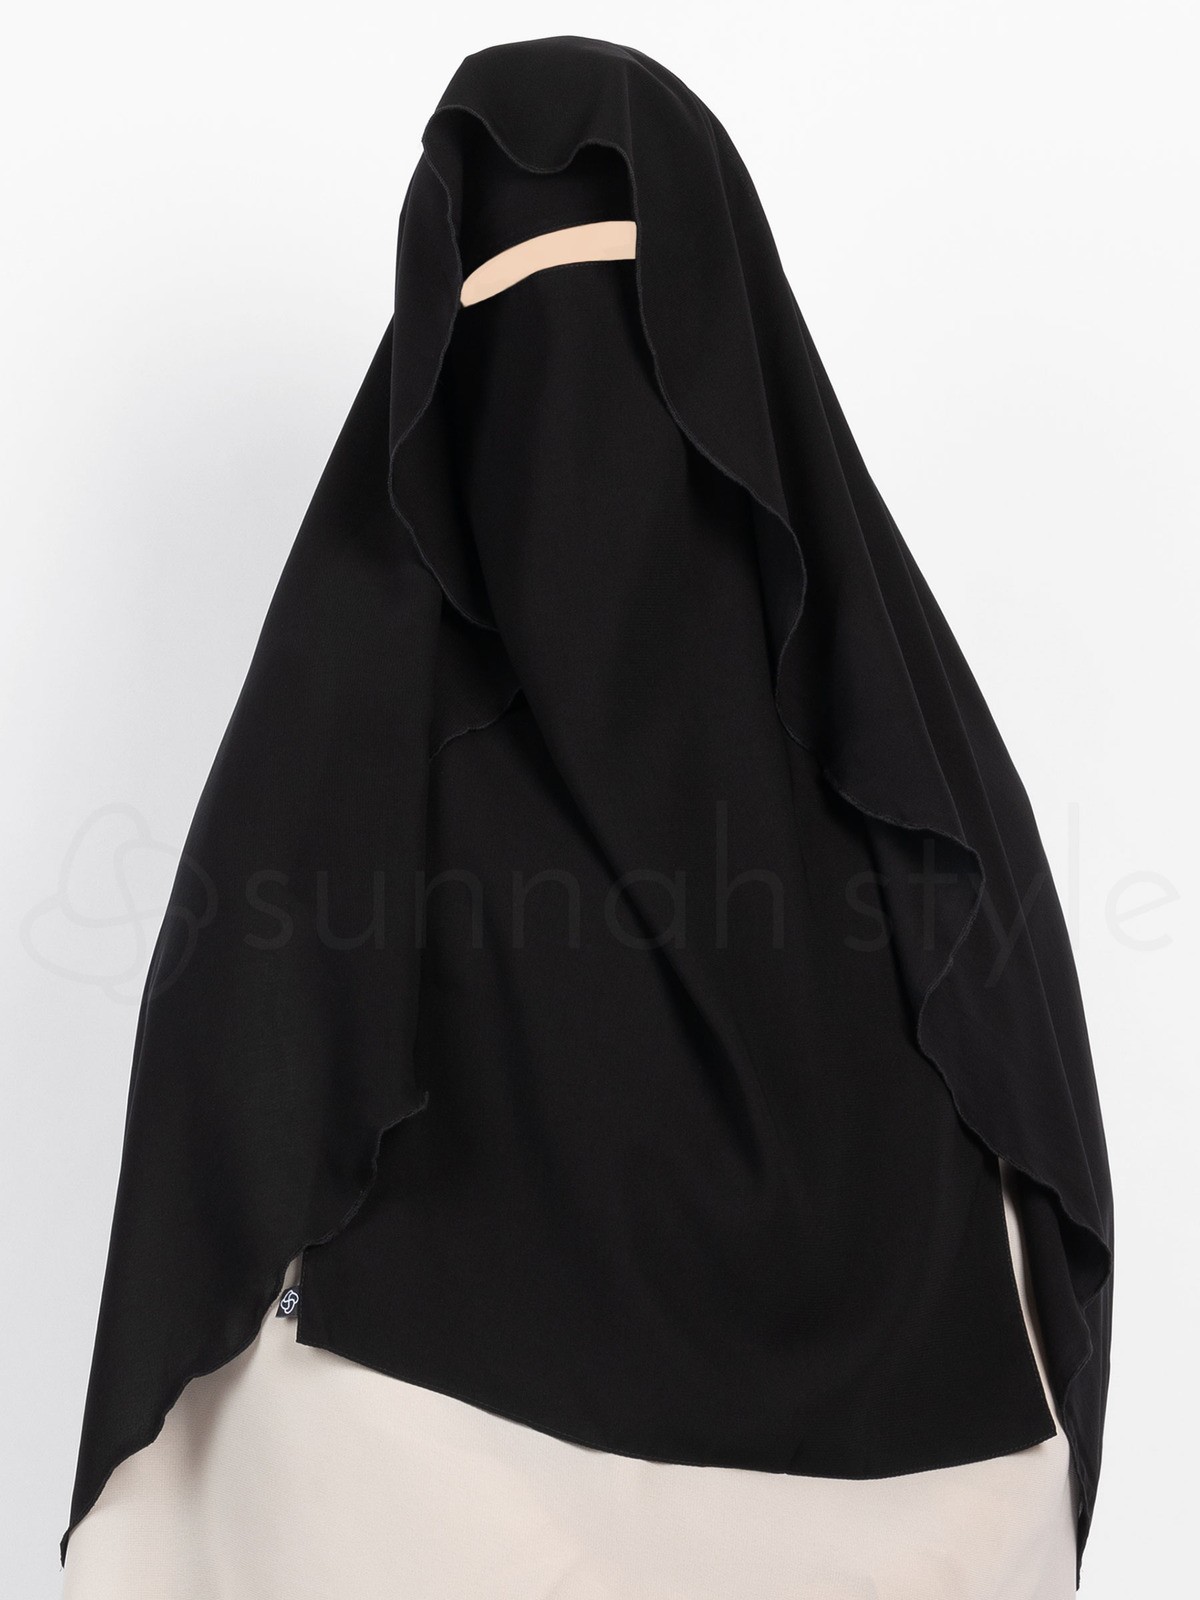 Sunnah Style - Extra Long Butterfly Niqab (Black)